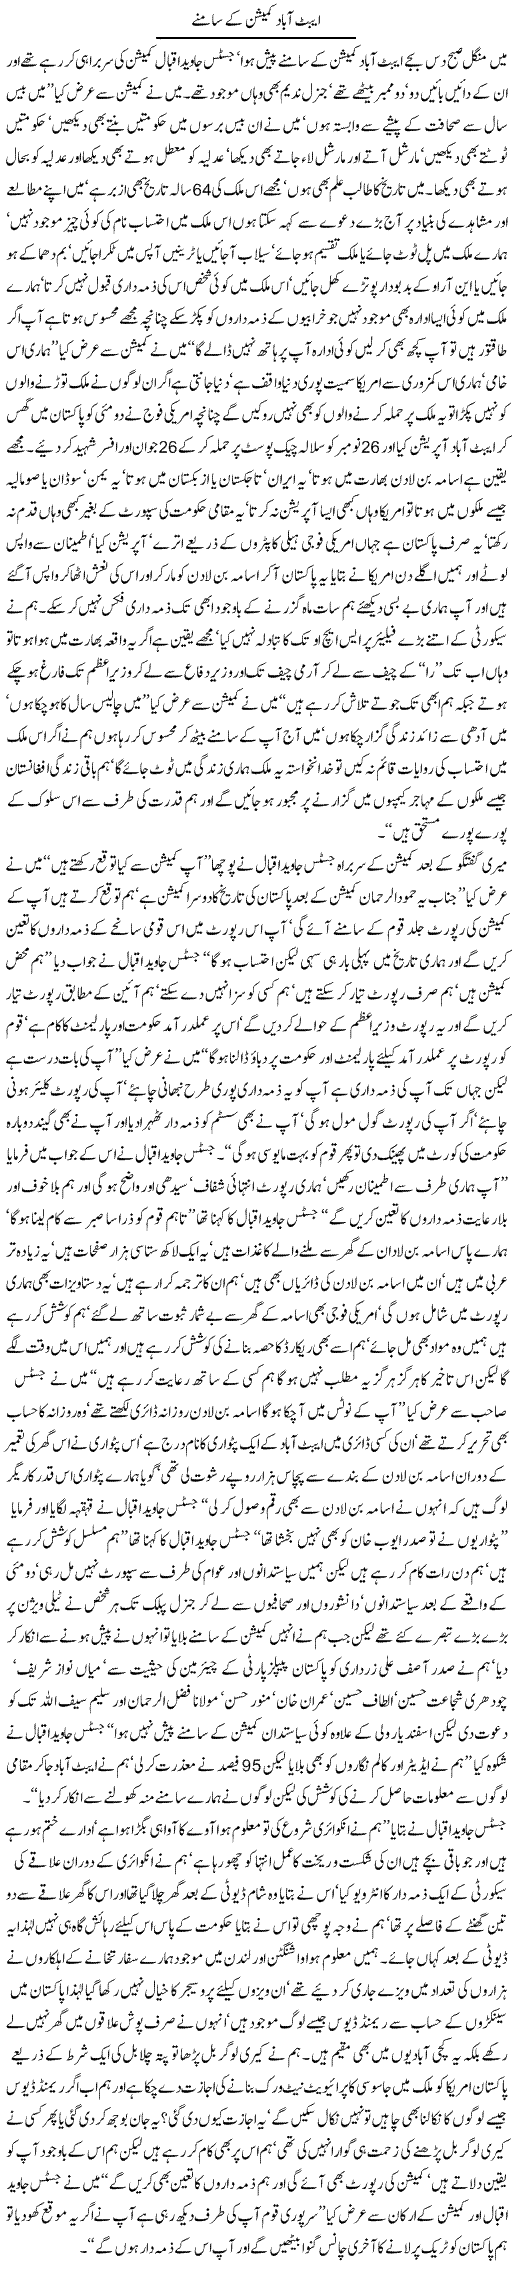 Abbottabad Commission Express Column Javed Chaudhry 6 January 2012